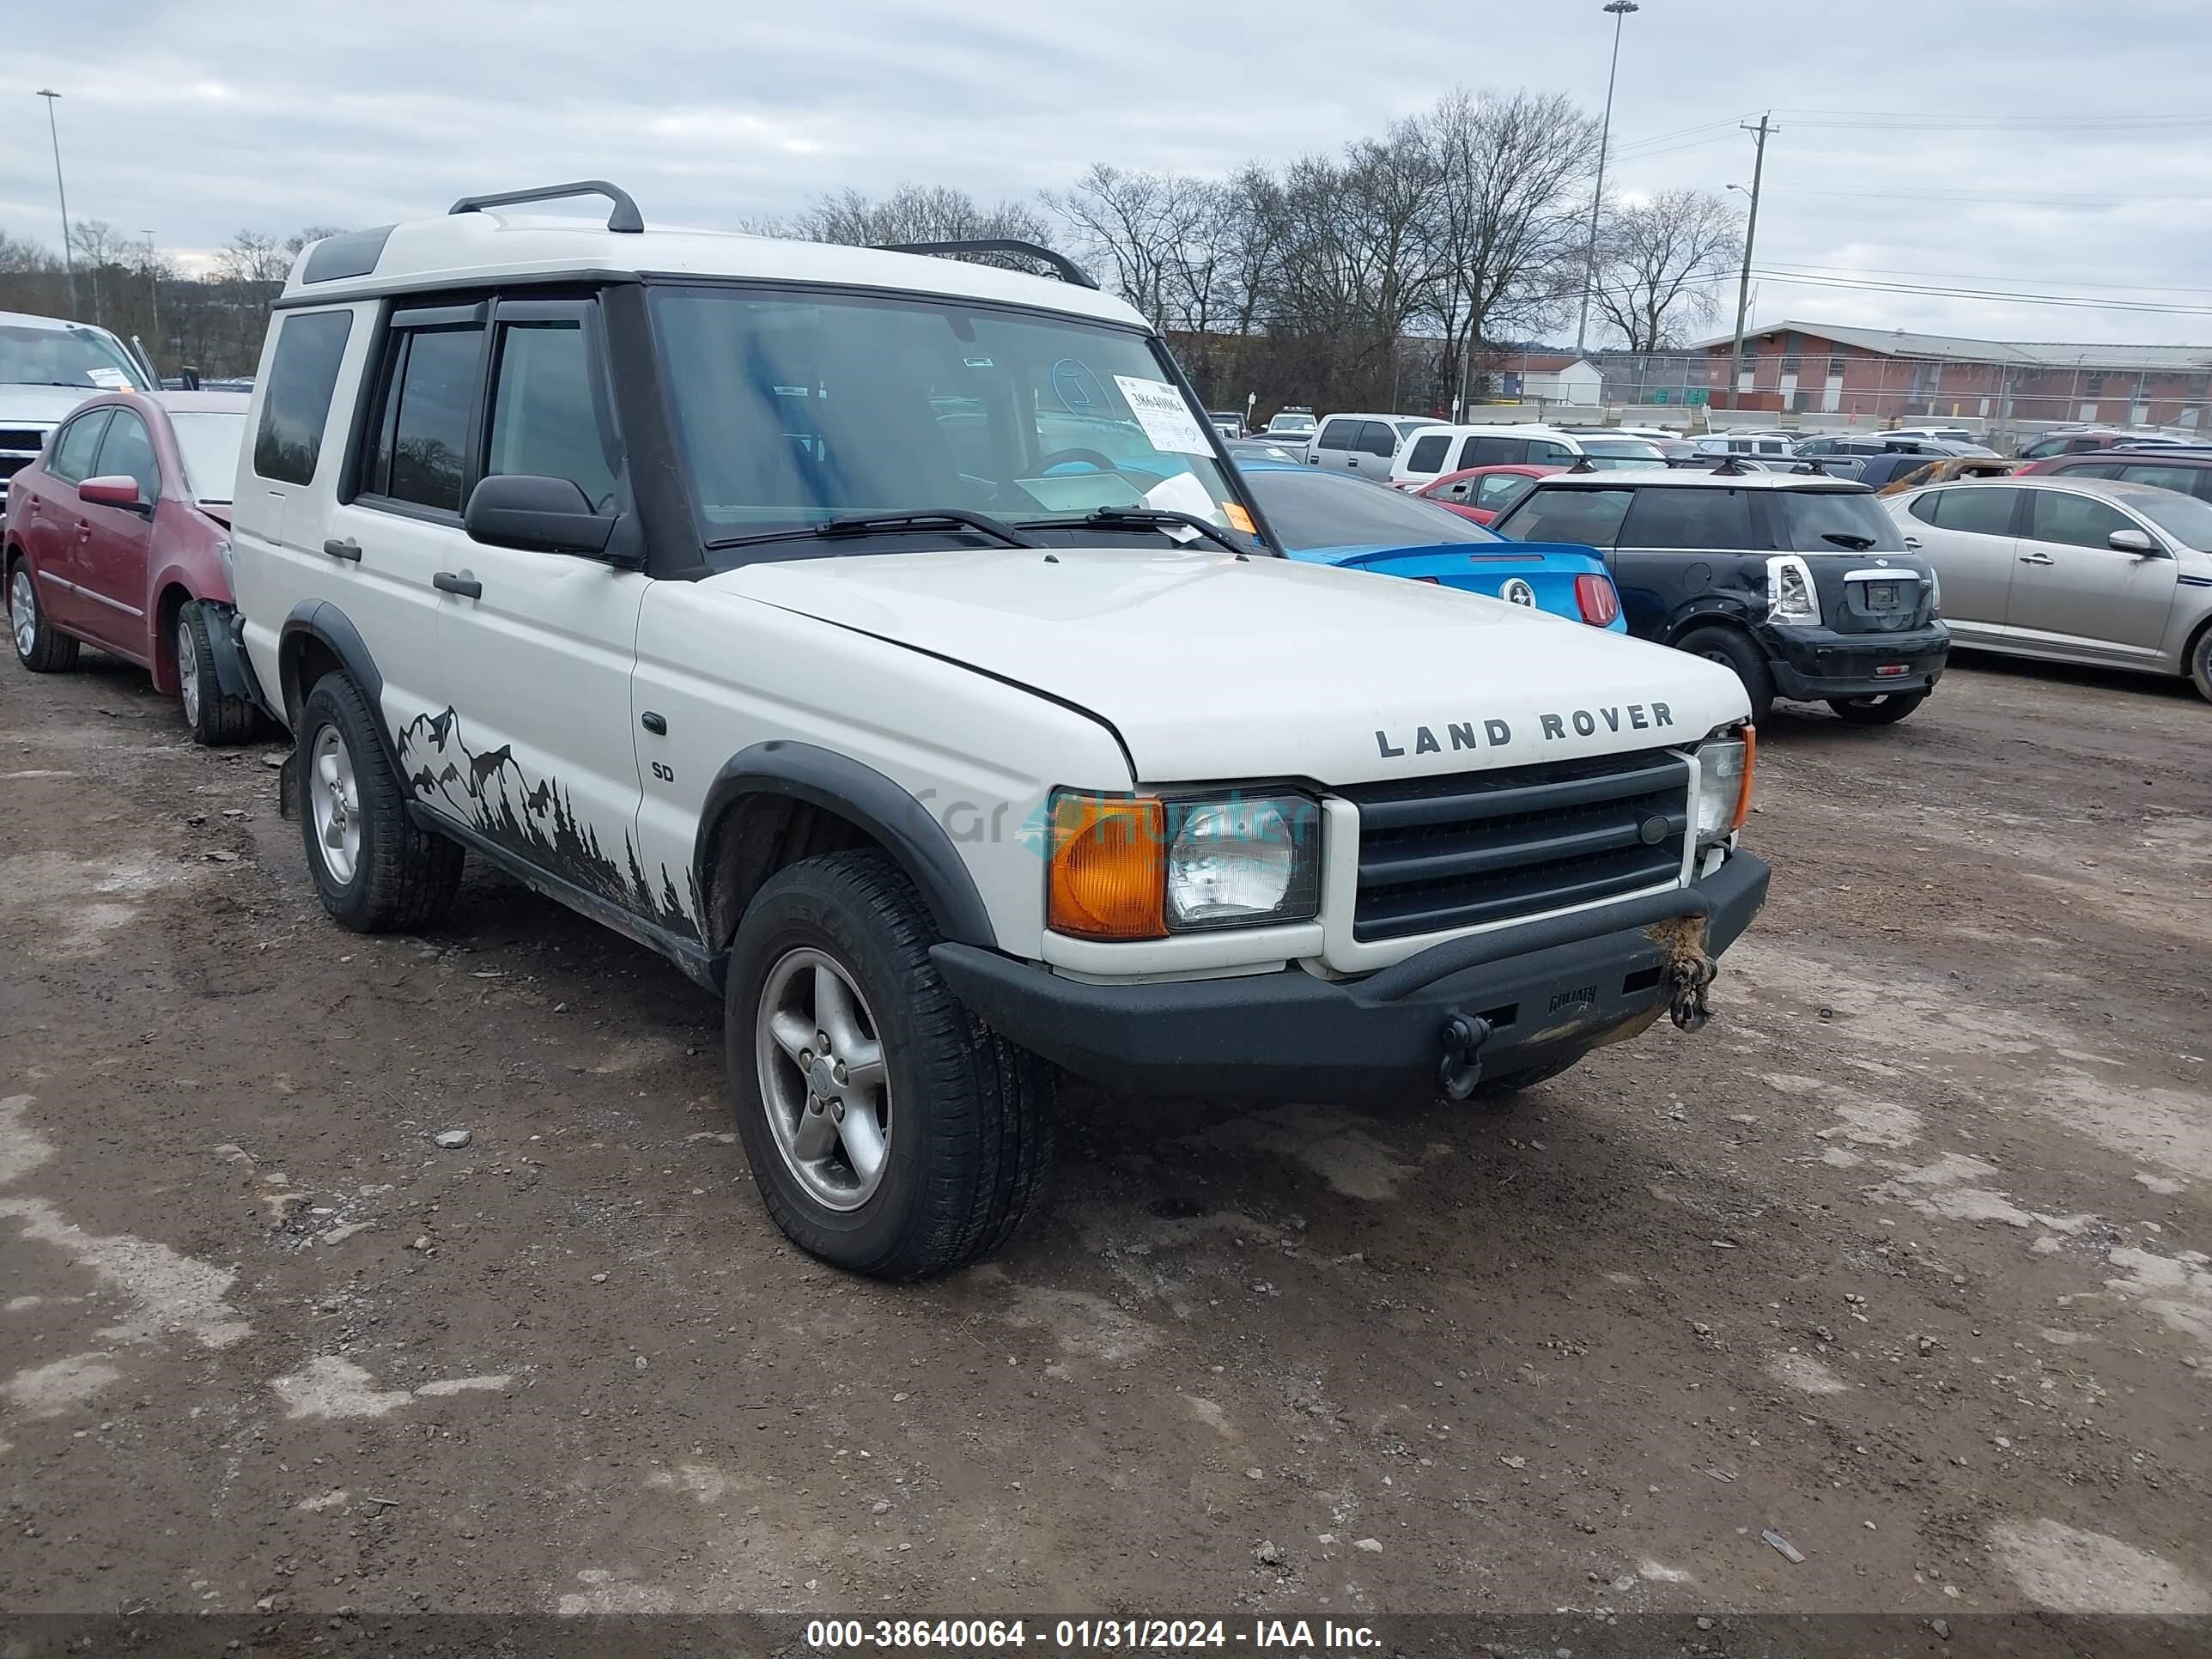 land rover discovery 2002 saltl15472a739071